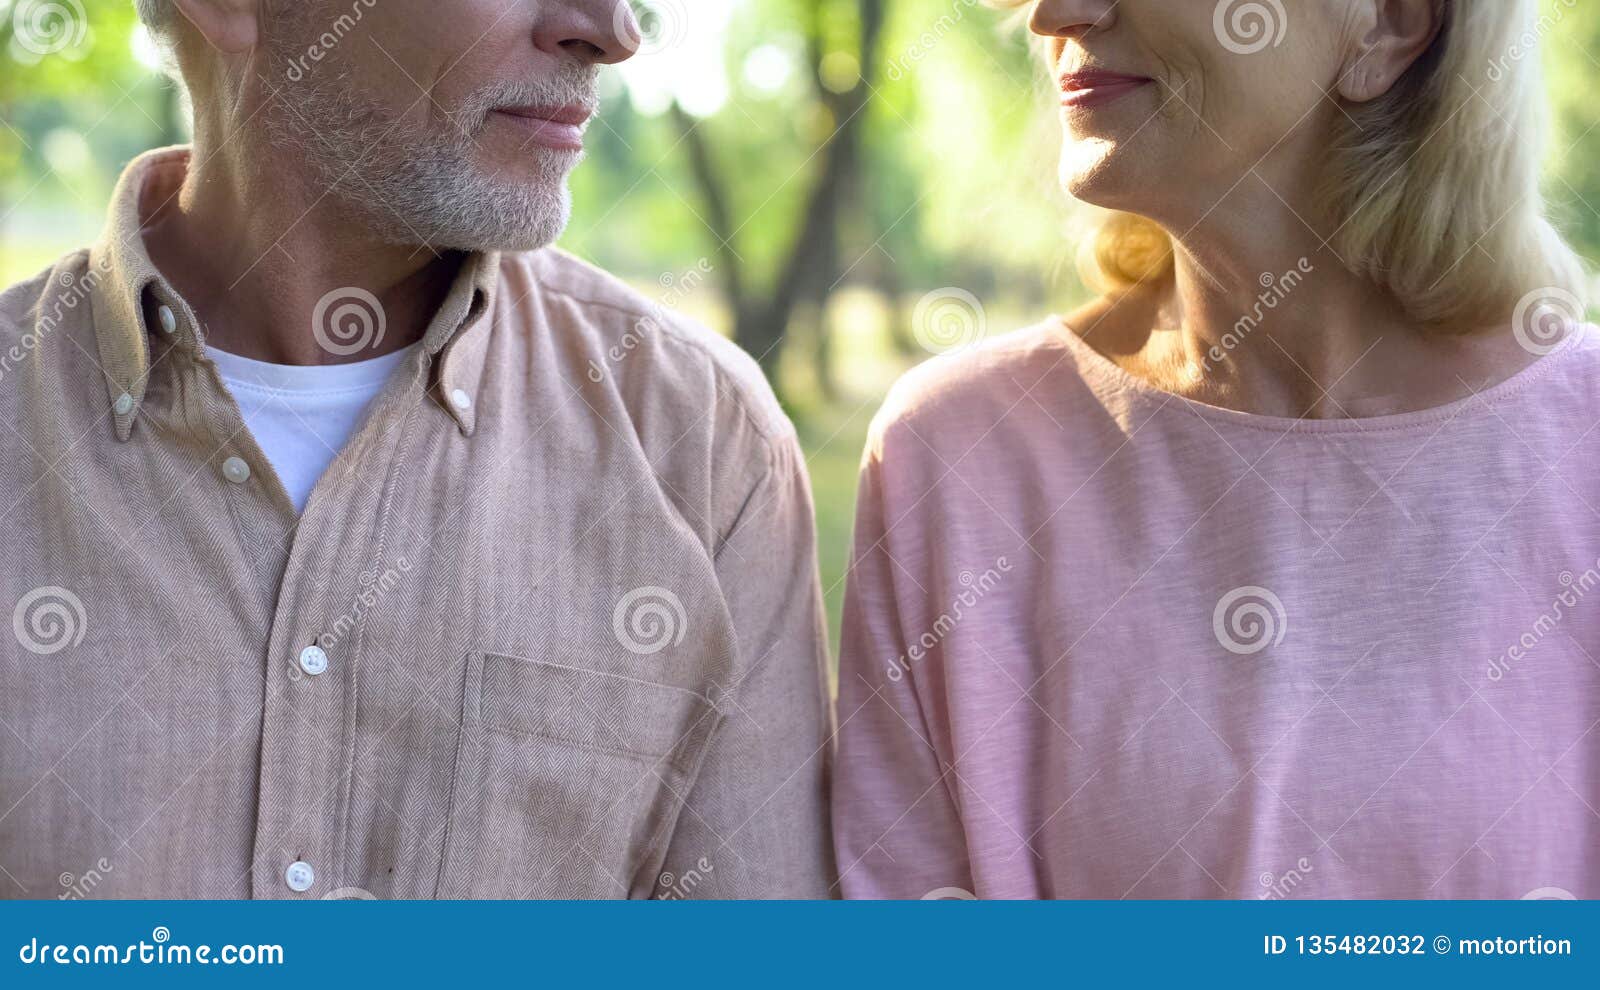 retired couple looking each other, romantic date outdoor, relation closeness